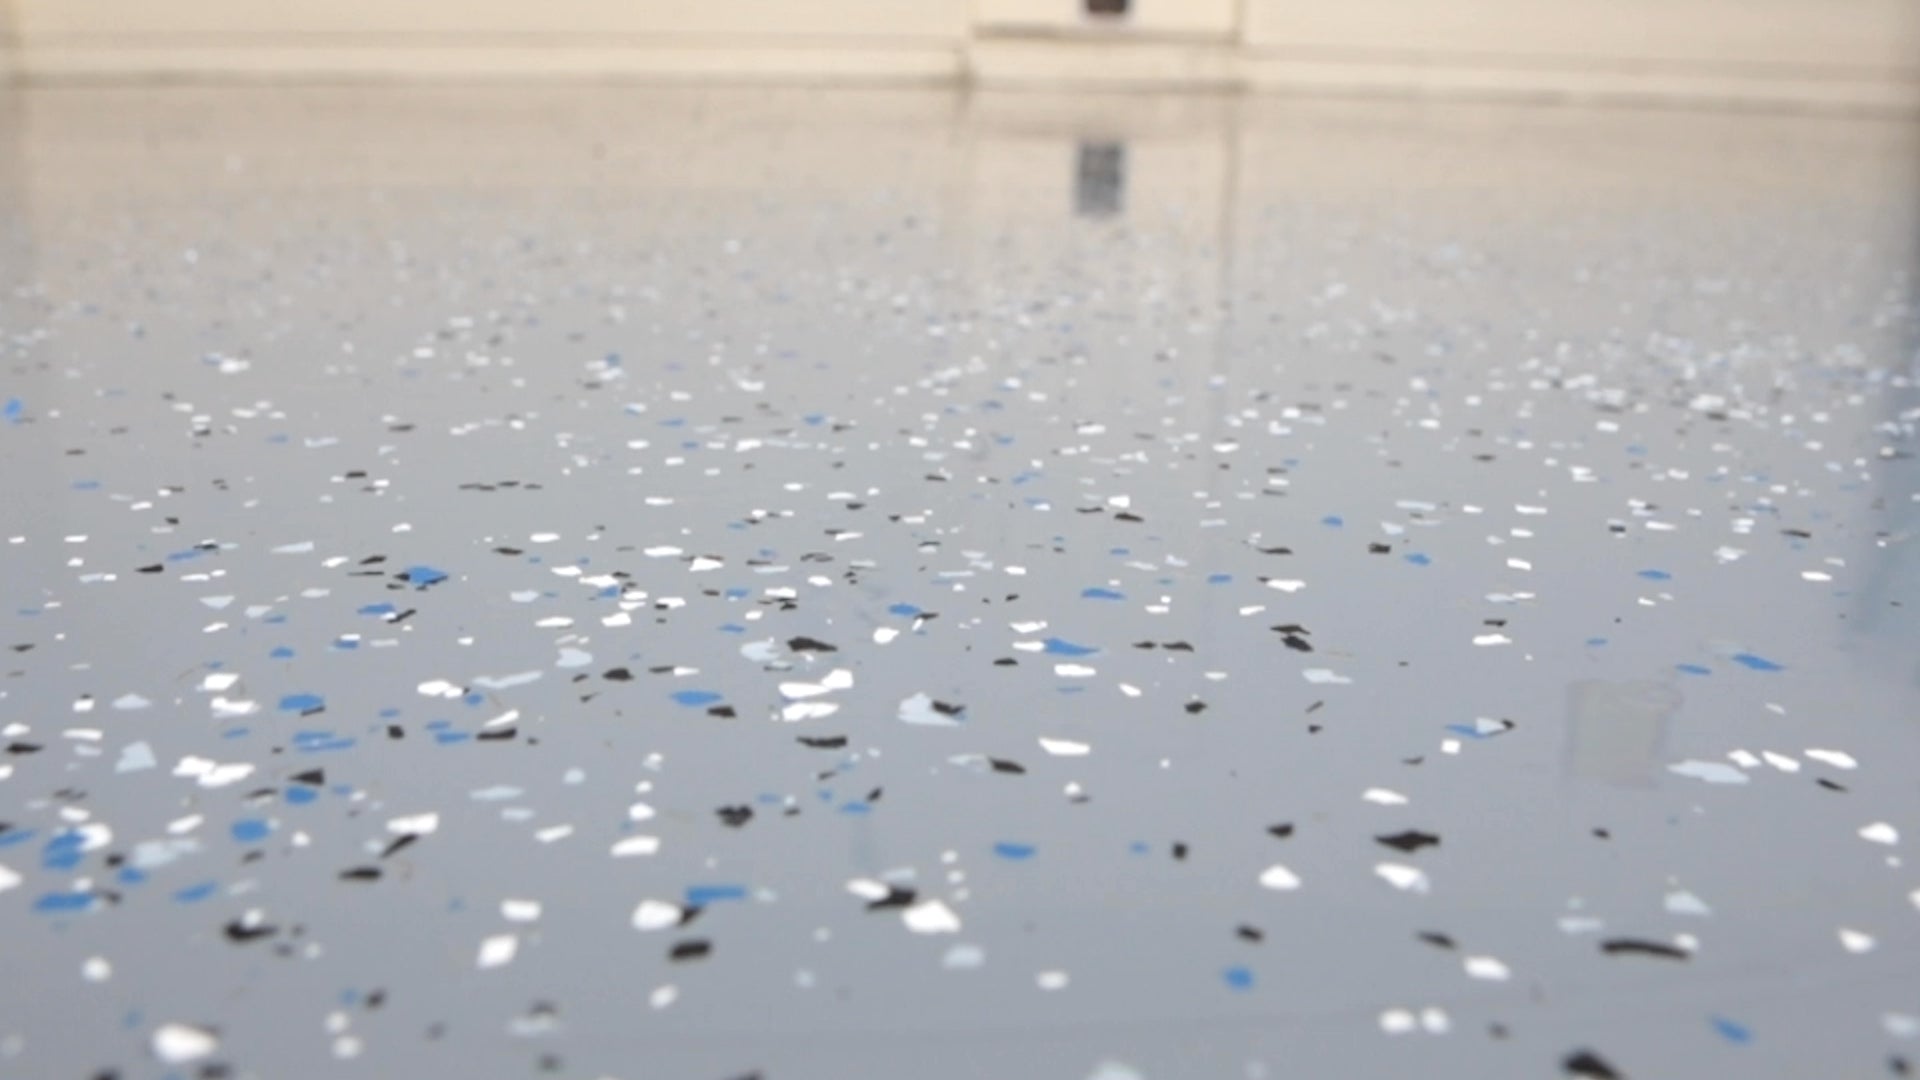 How to Broadcast Vinyl Flake & More on Epoxy Resin Floors - Xtreme Polishing Systems